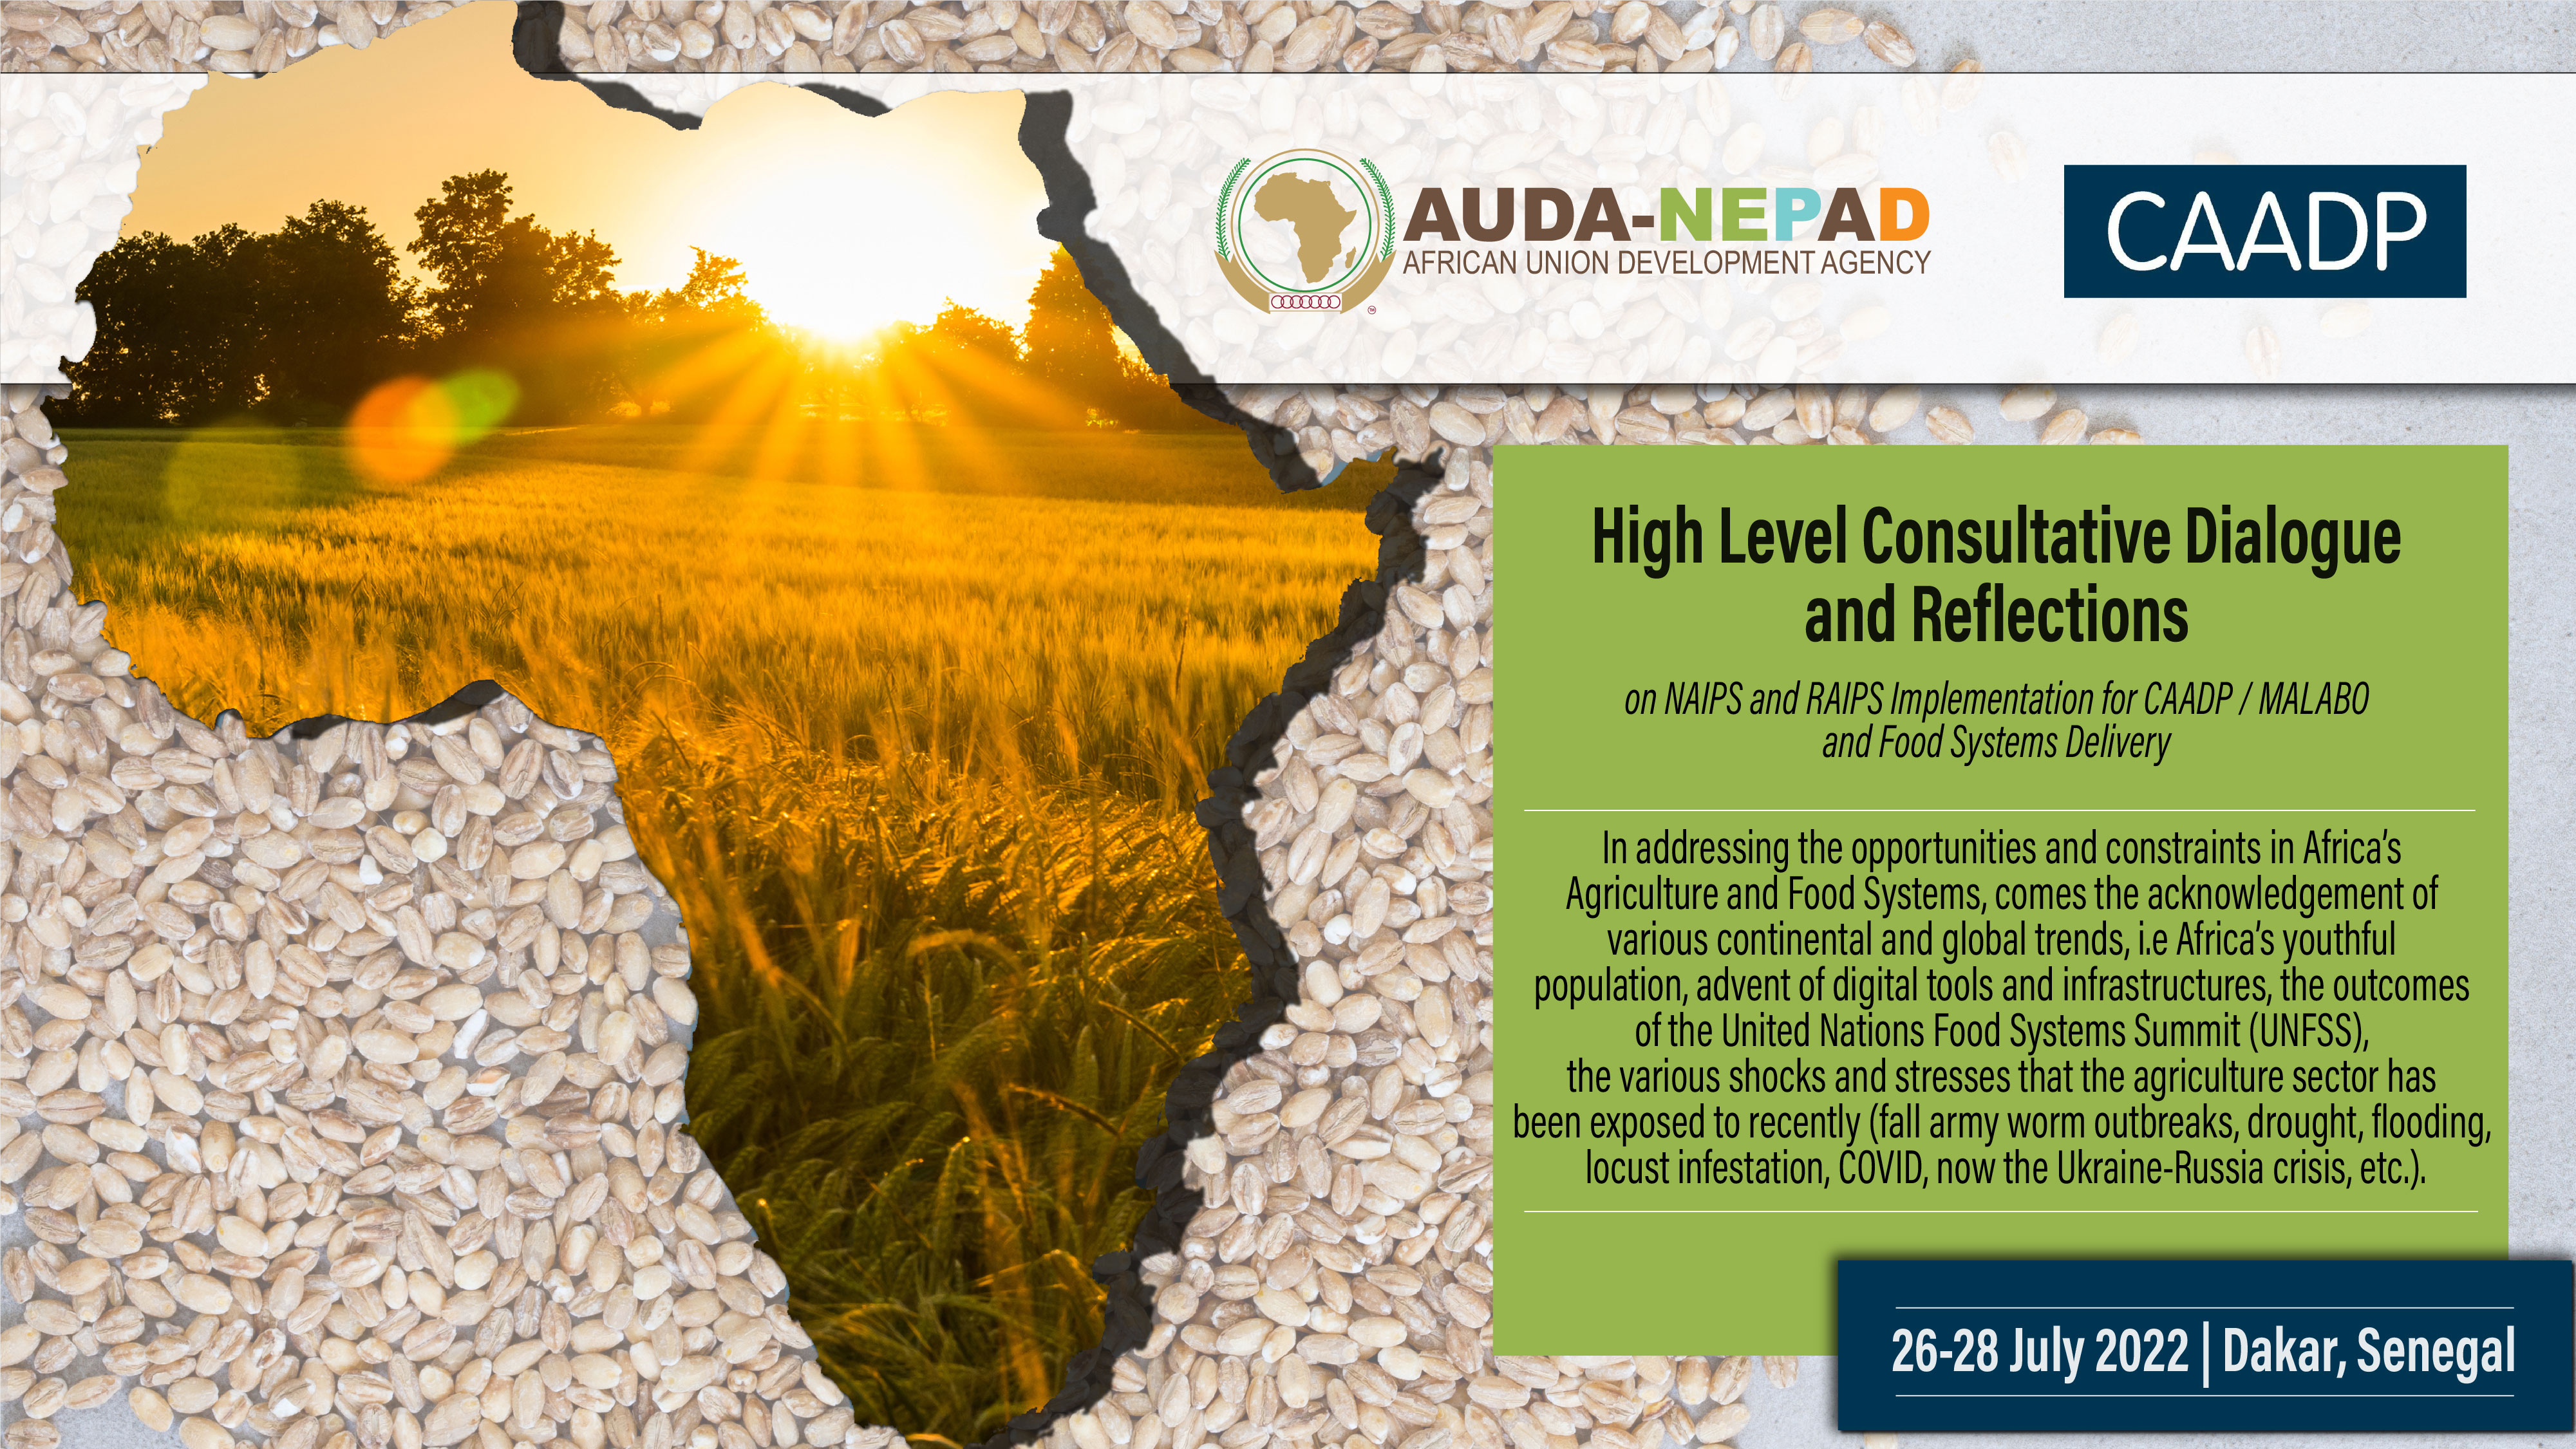 CAADP Key Messages 7